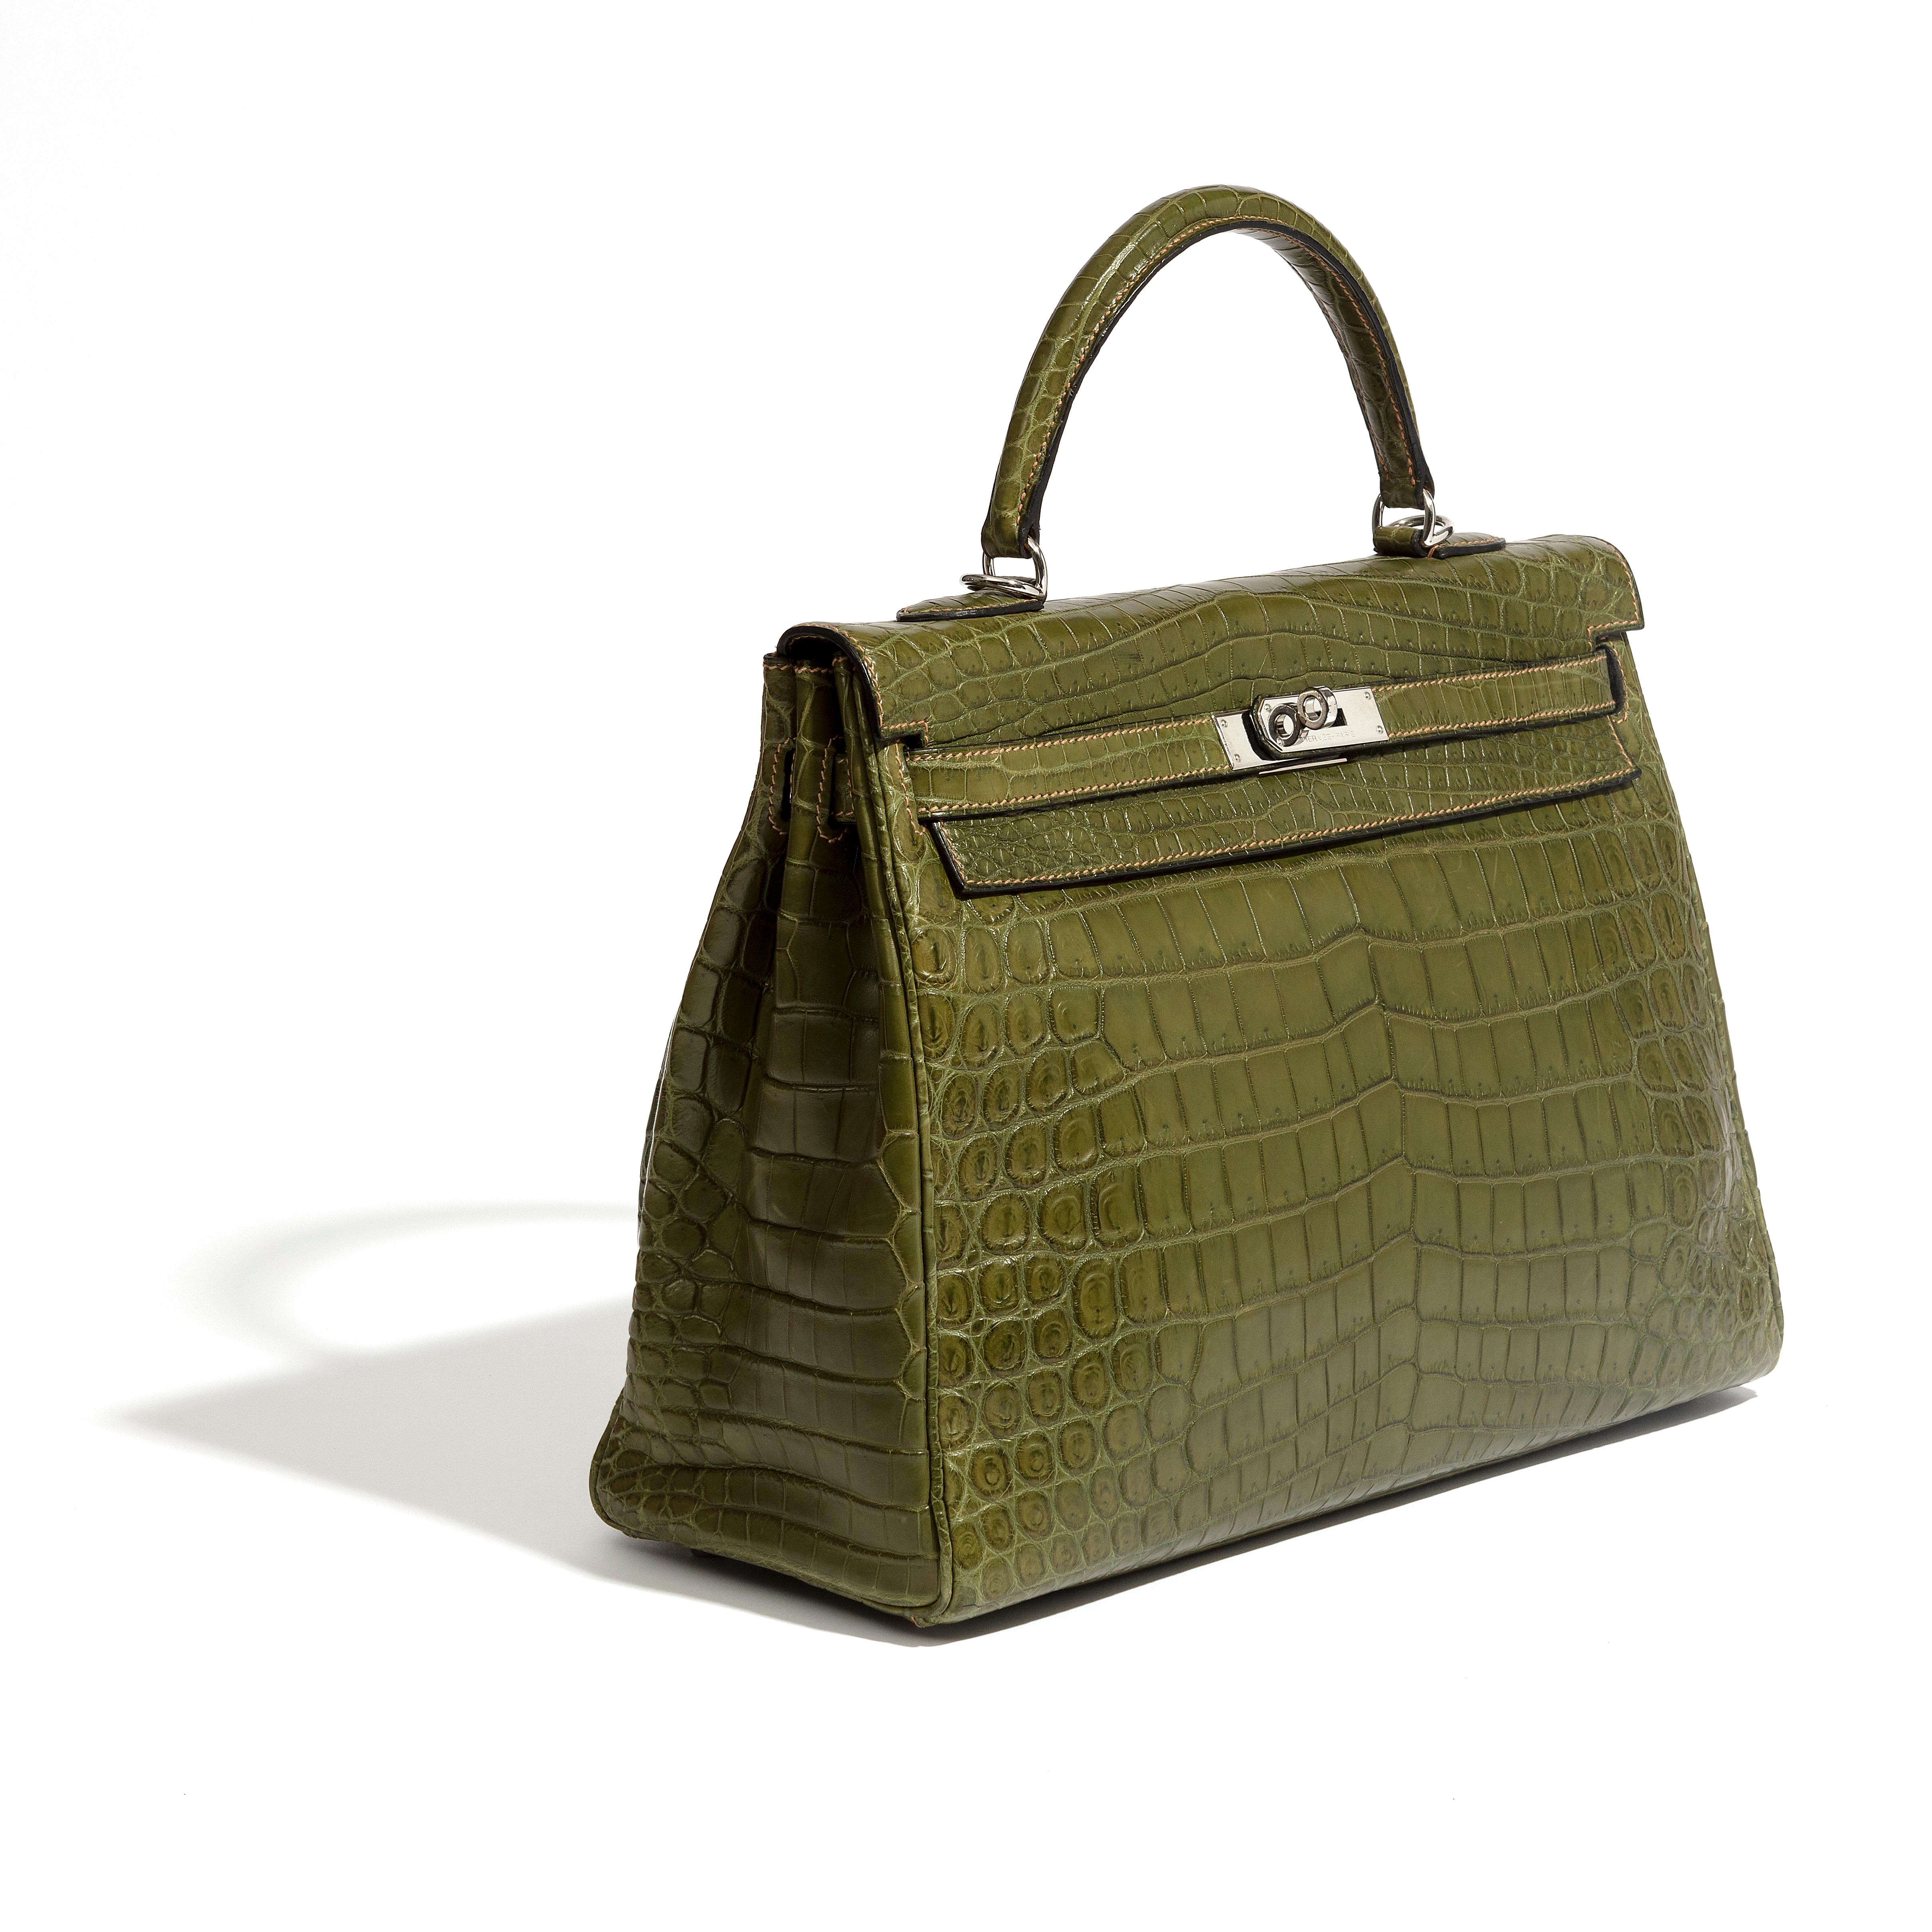 One of the most sought-after Hermès styles, this pre-owned Kelly 35 Green Niloticus bag has been crafted from khaki green crocodile leather. A true testament to the quality of the house's craftsmanship. 

* Top handle 
* Palladium tone hardware
*